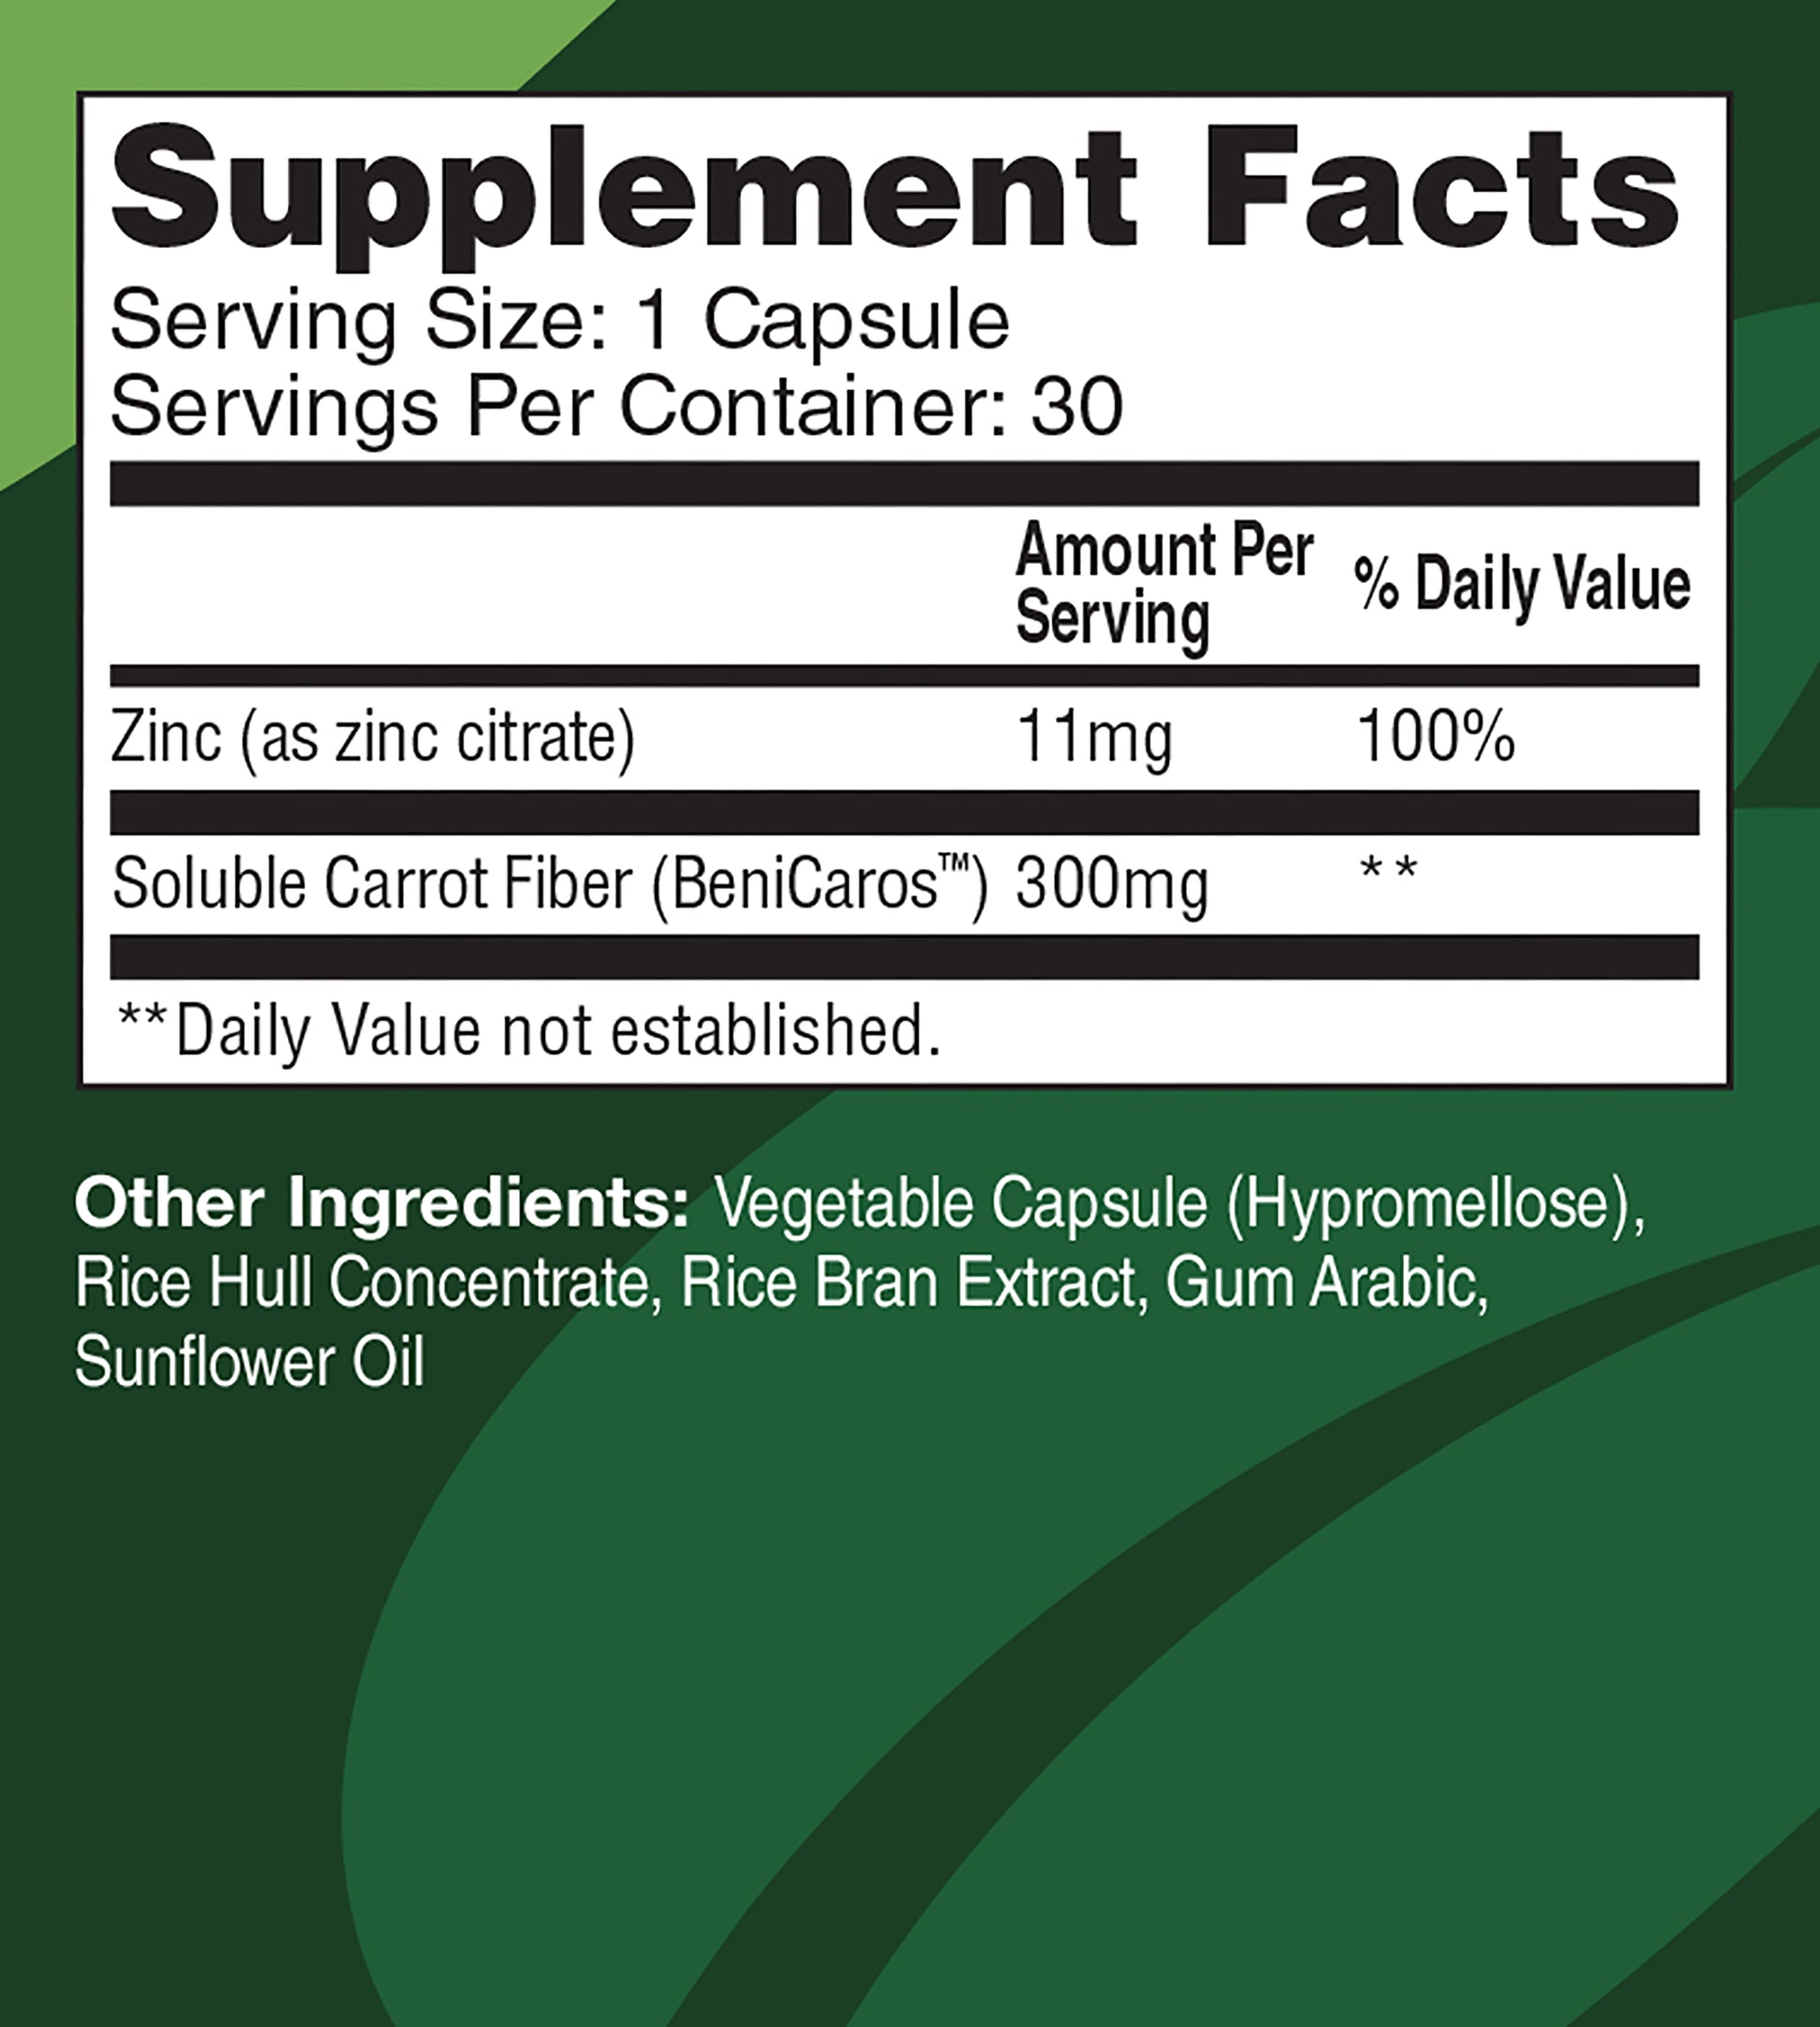 Supplement facts, serving size 1 capsule, servings per container 30. Zinc, 11mg per serving, 100% of daily value. Soluble Carrot Fiber BeniCaros, 300mg per serving, percent daily value not established.